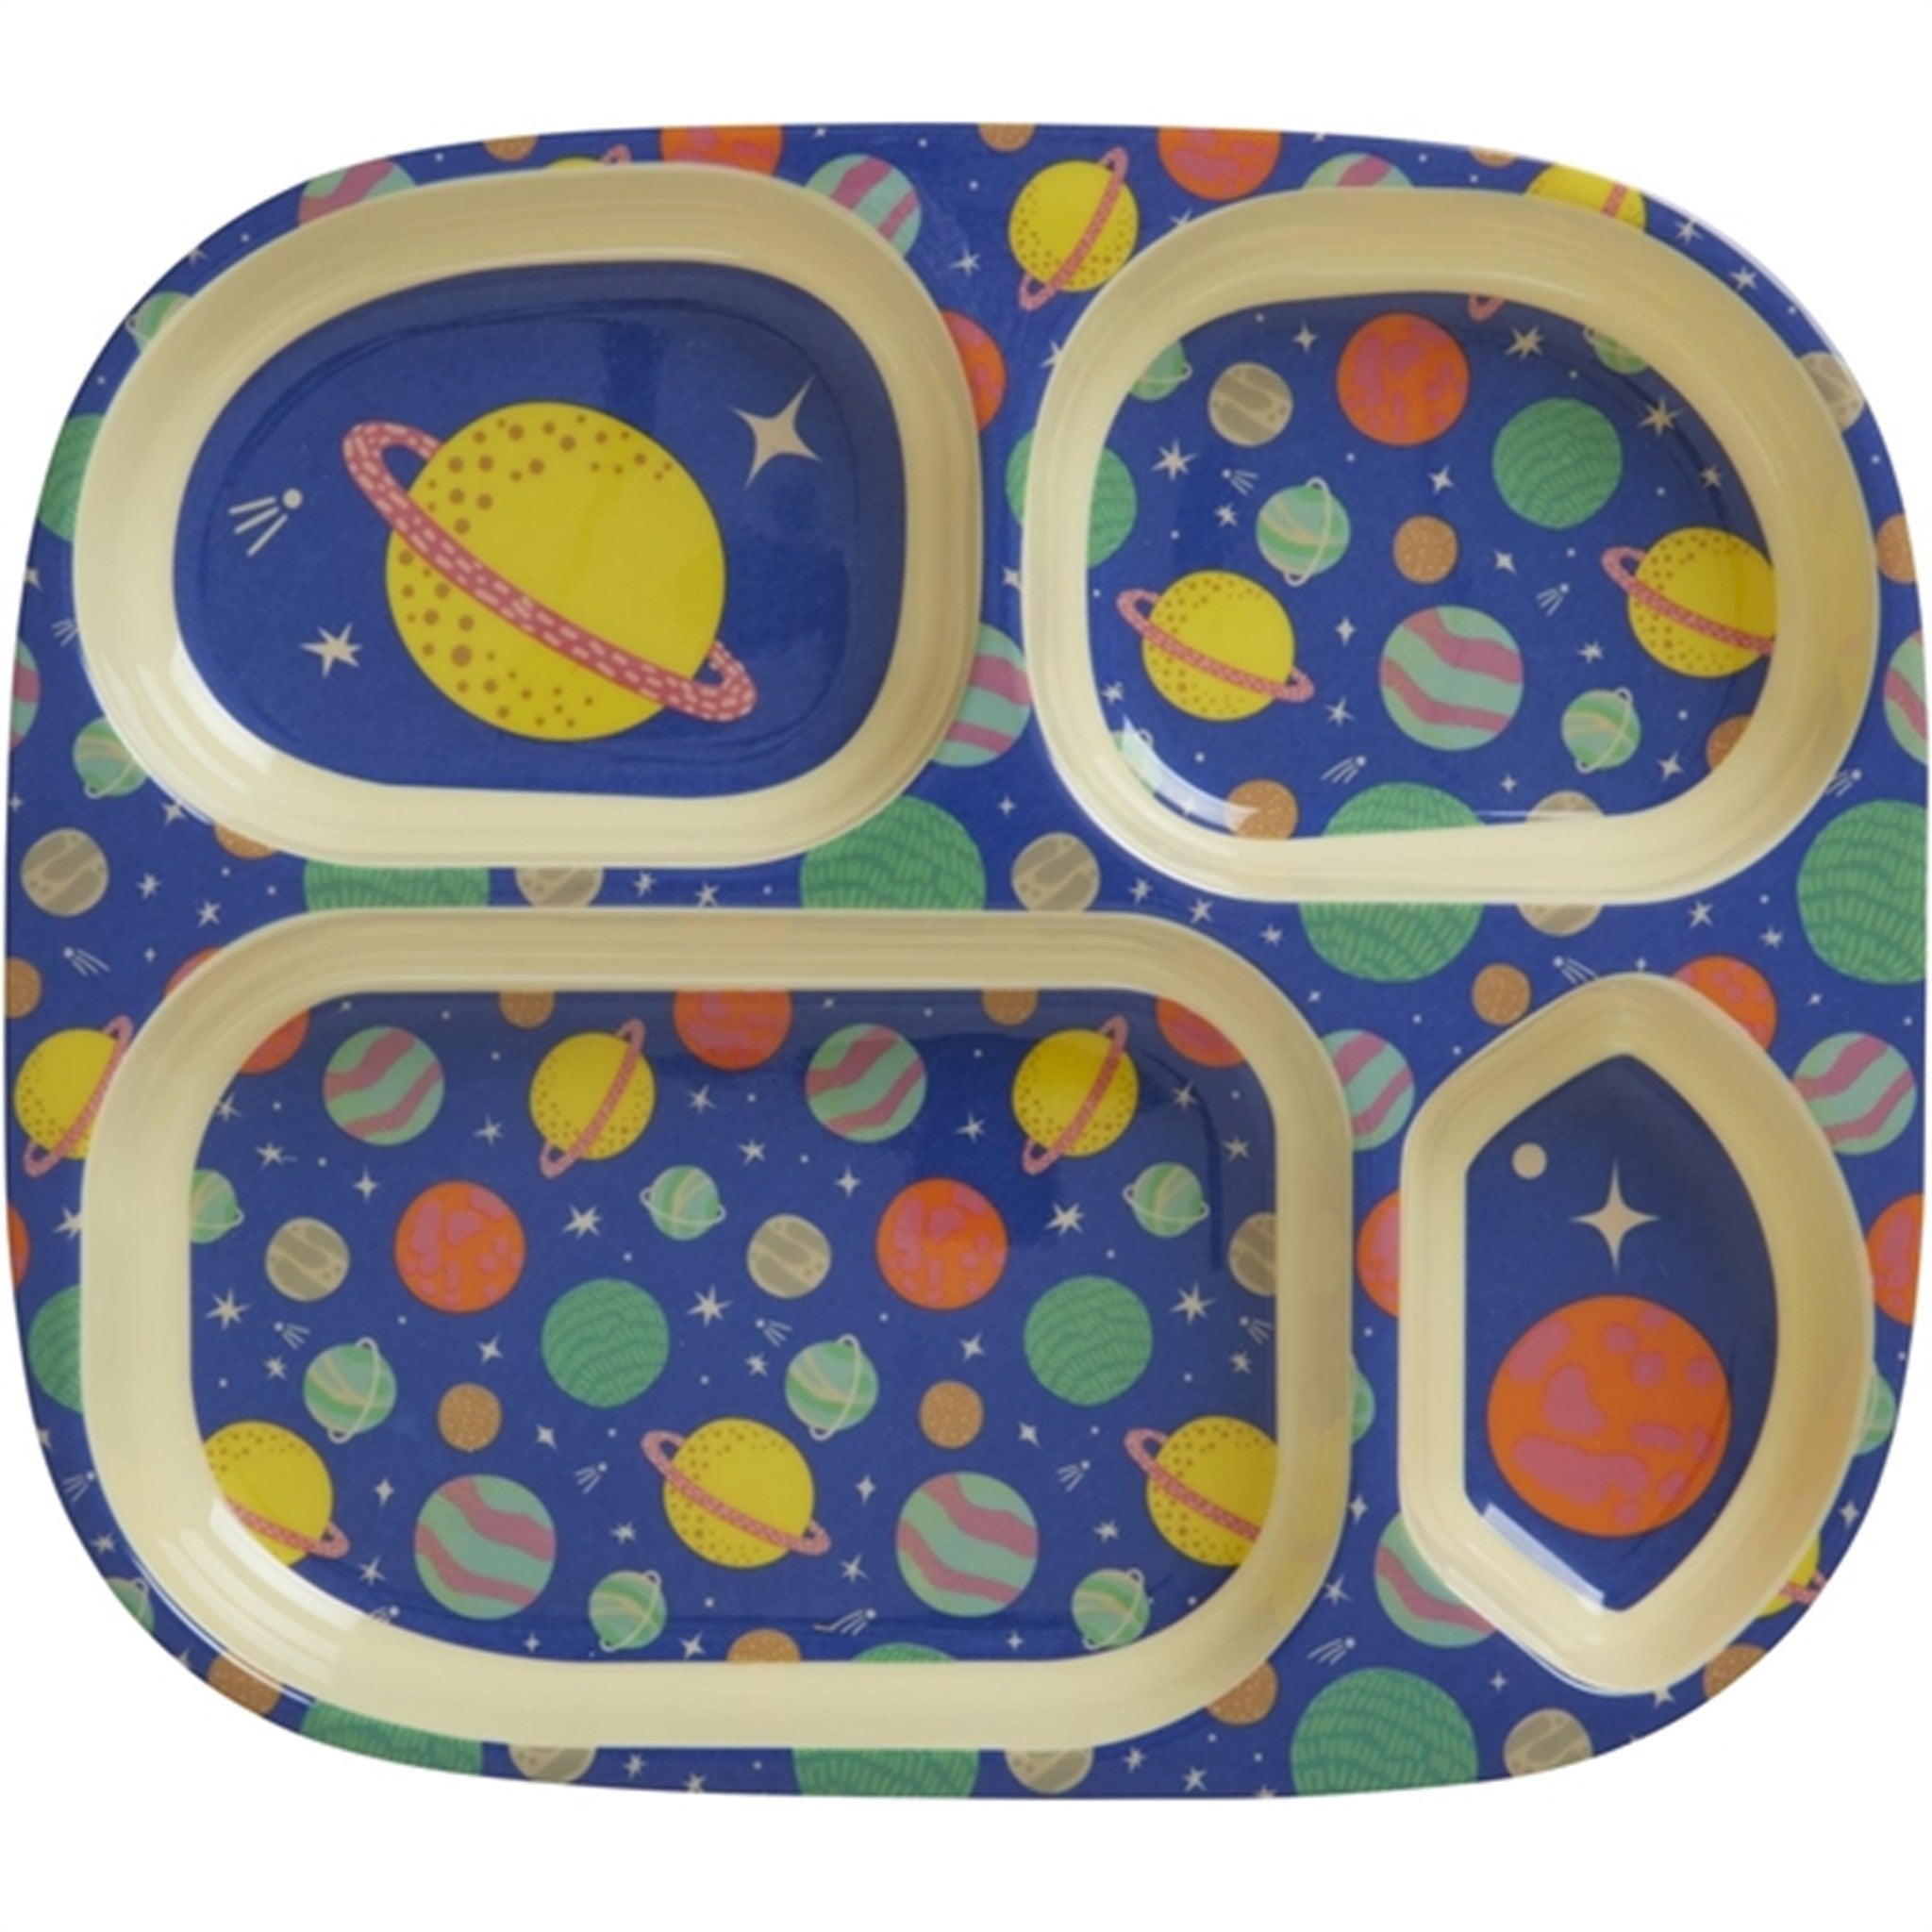 RICE Galaxy Melamine Childrens Plate with 4 Rooms